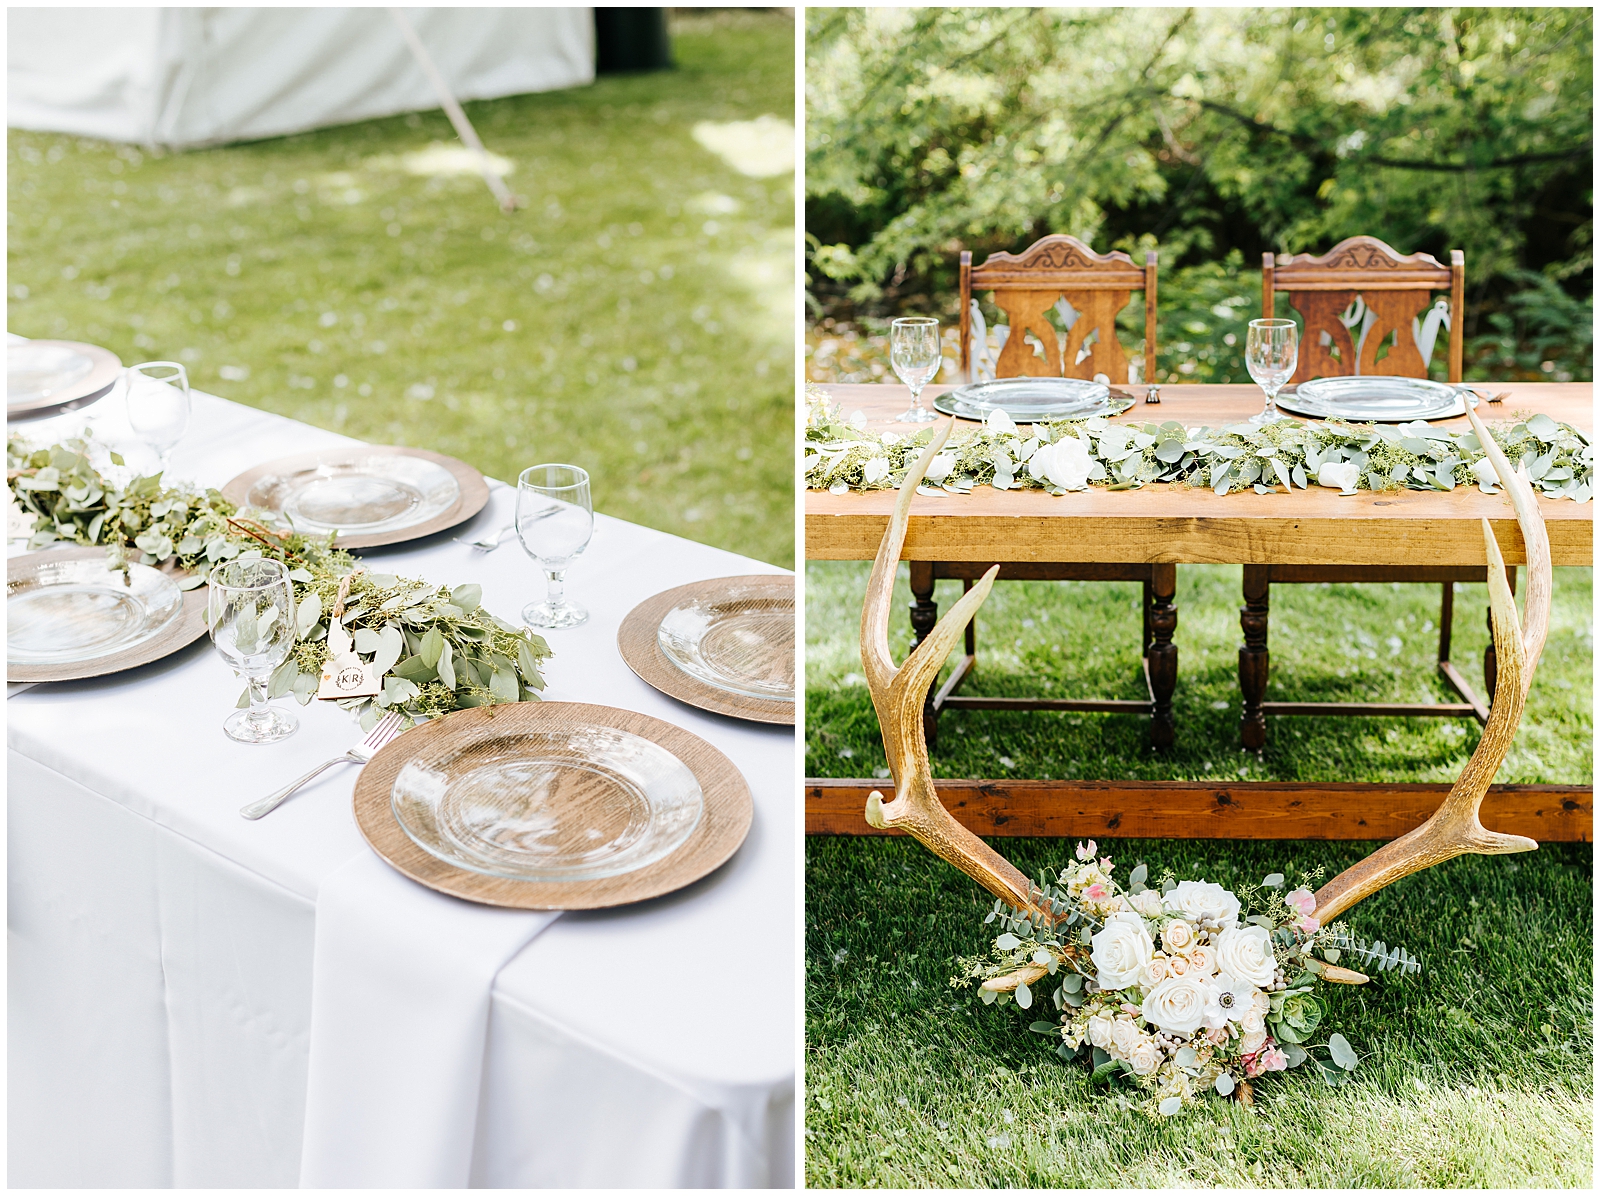 Outdoor rustic chic wedding details with antlers covered in florals, wood chargers, clear plates, and a rustic wood Sweetheart Table